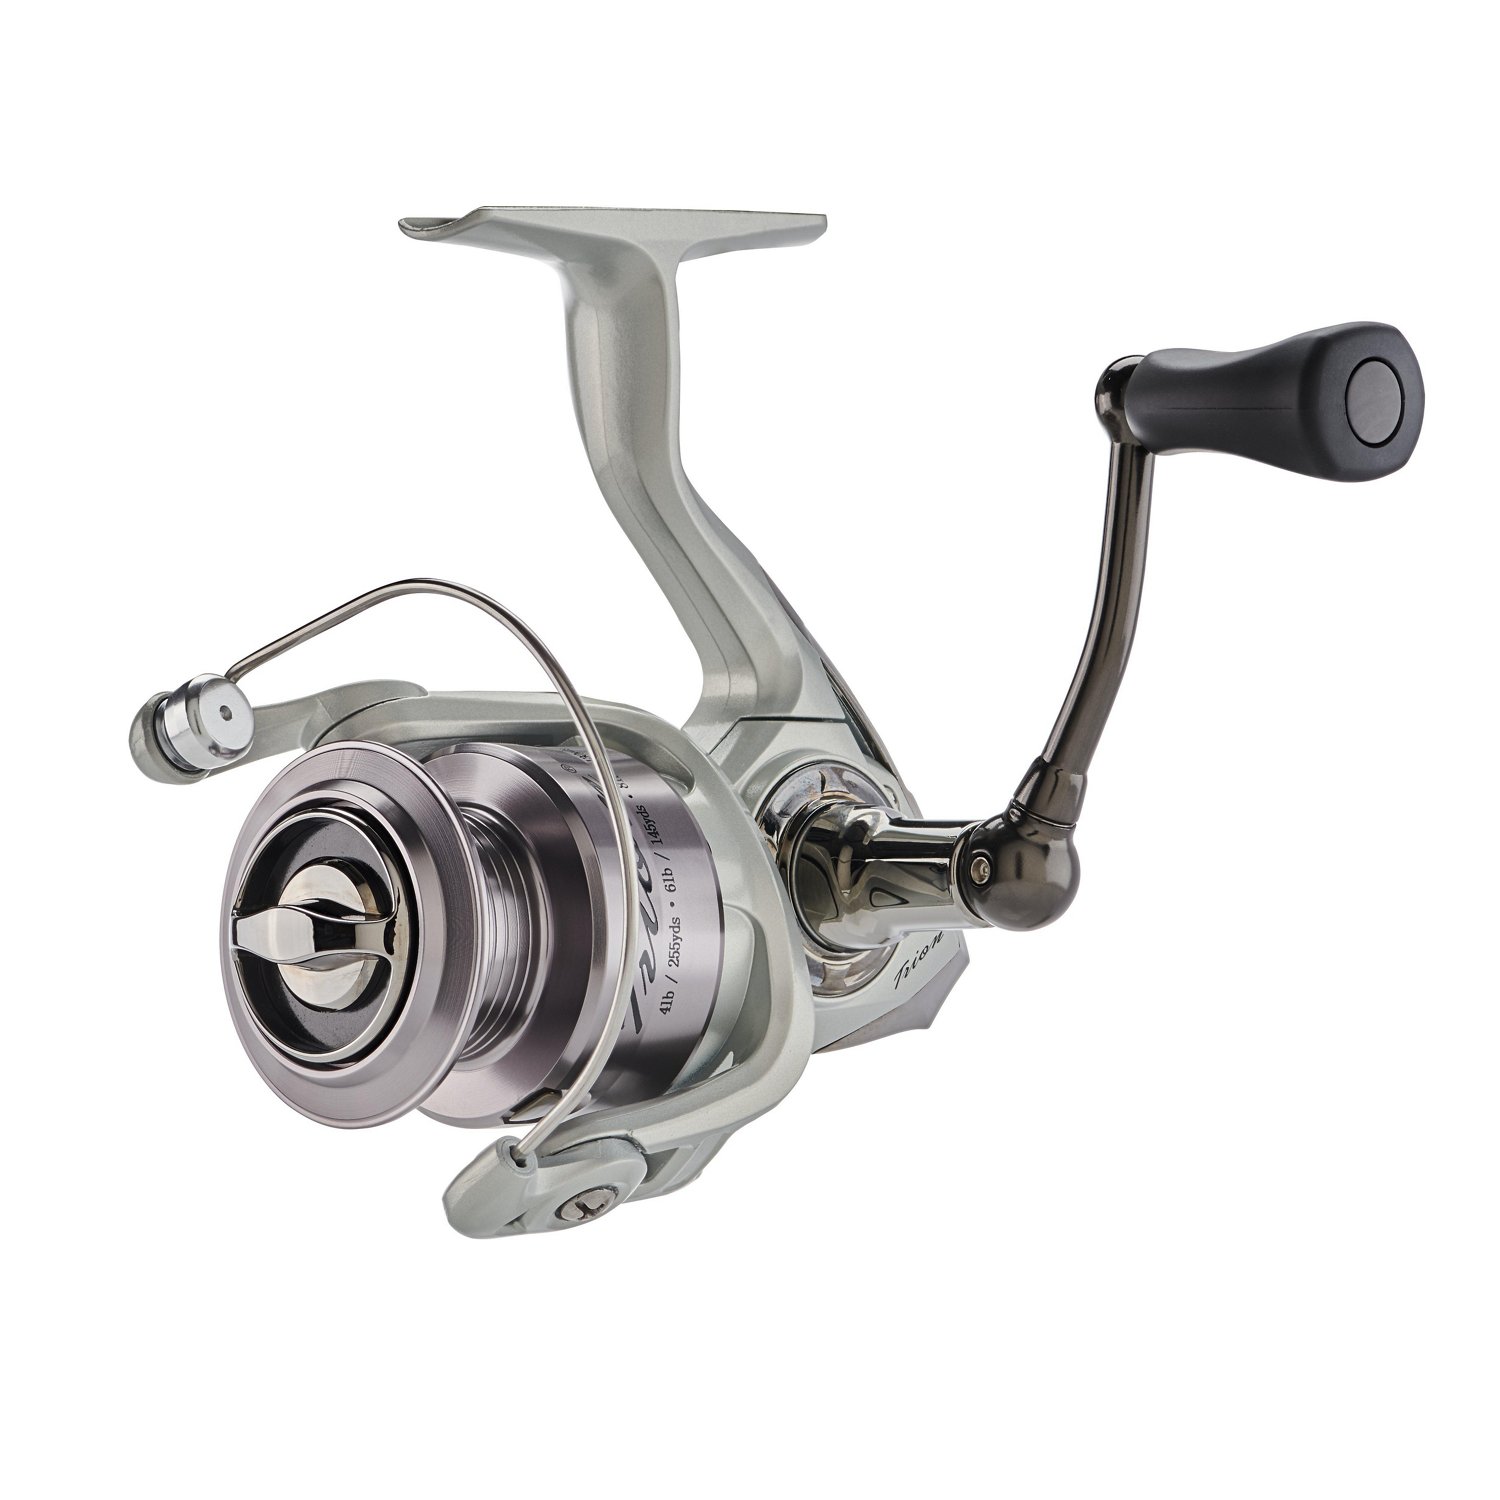 Tempo Sphera Spinning Reel, High-Tech Innovative Fishing Reel,9+1 BB, Lightweight, Durable & Sturdy, Incredibly Smooth, Powerful, Ultralight Spinning